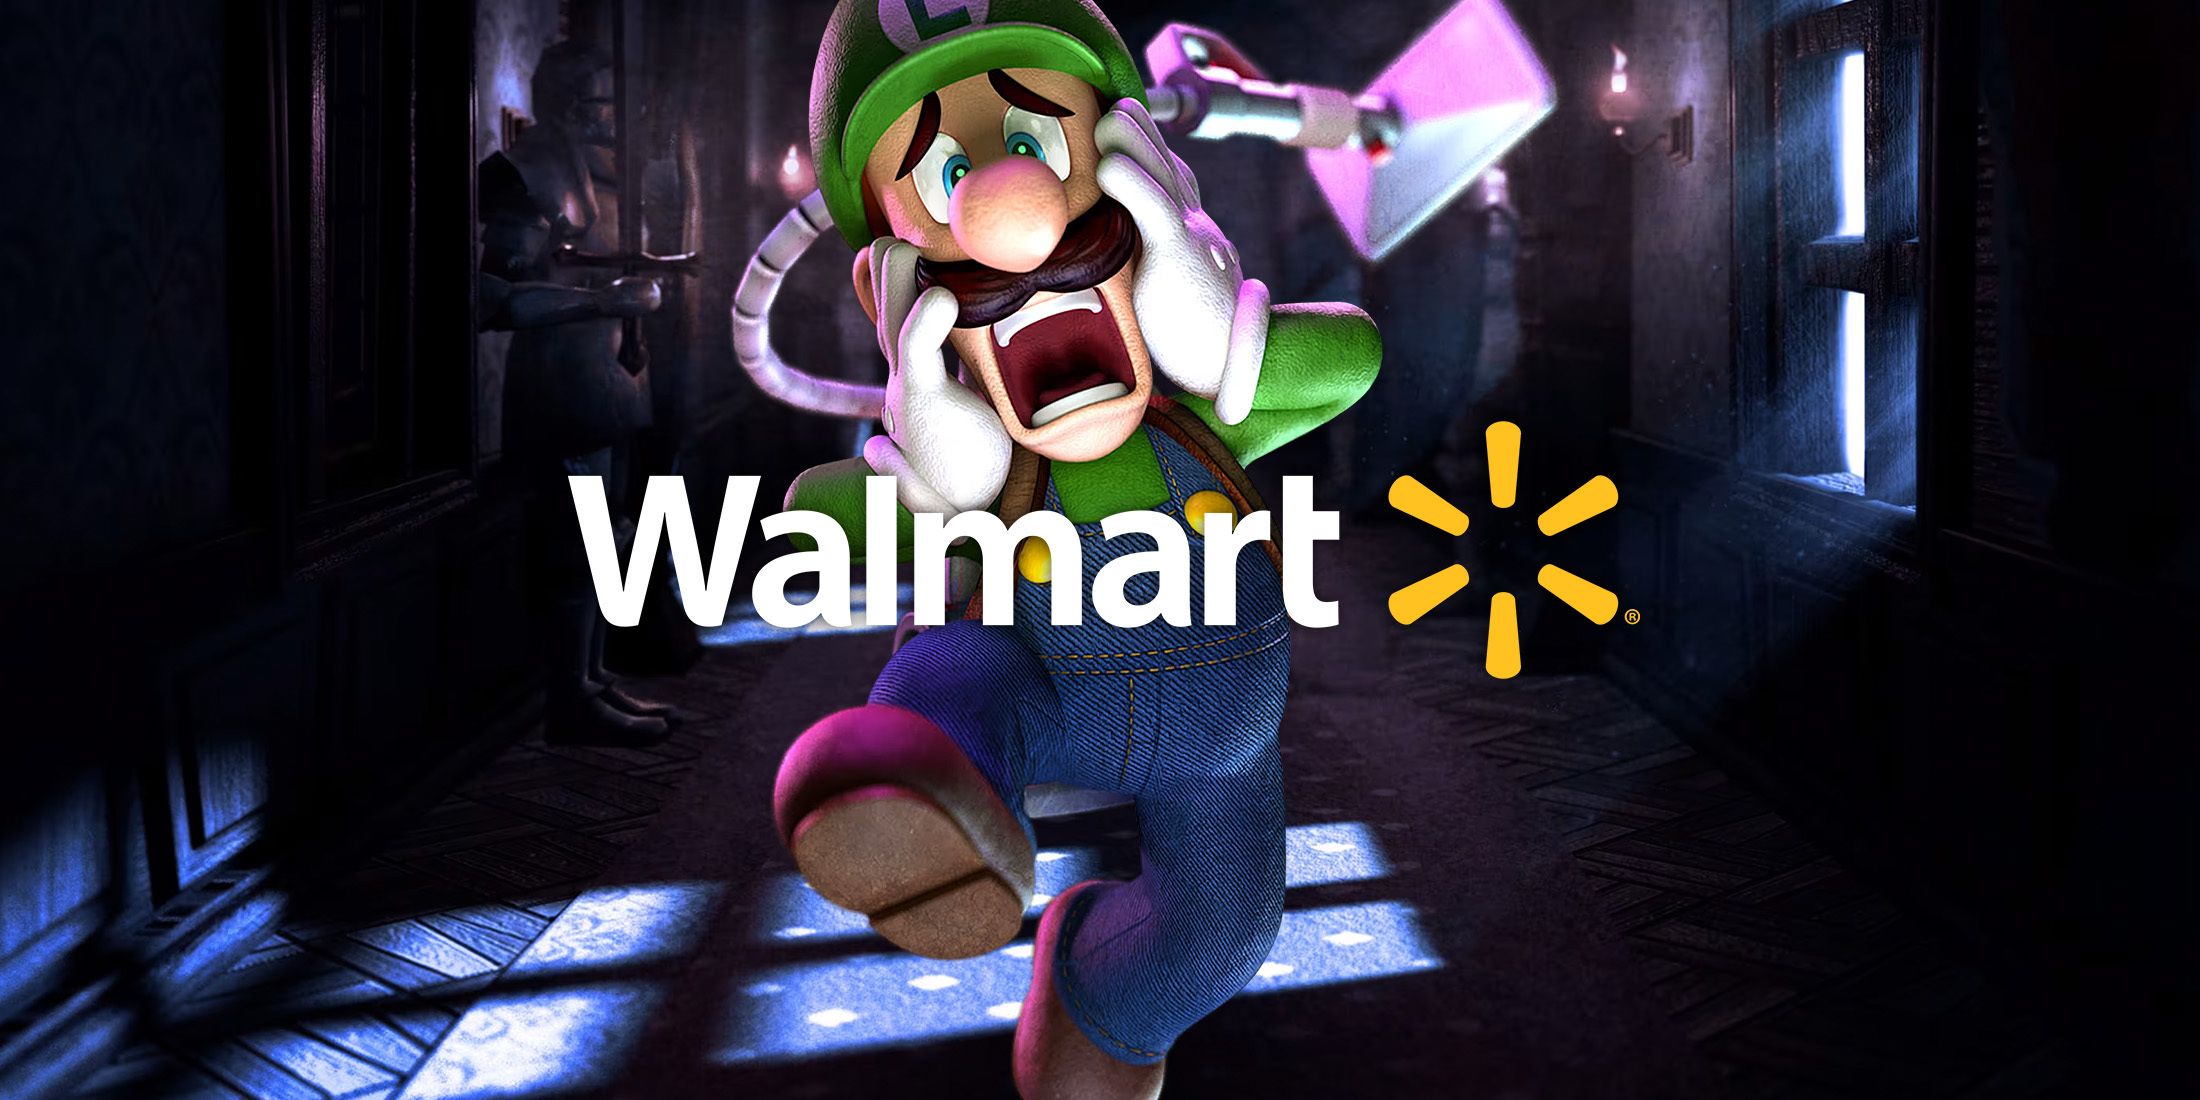 luigis mansion 2 hd pre orders canceled